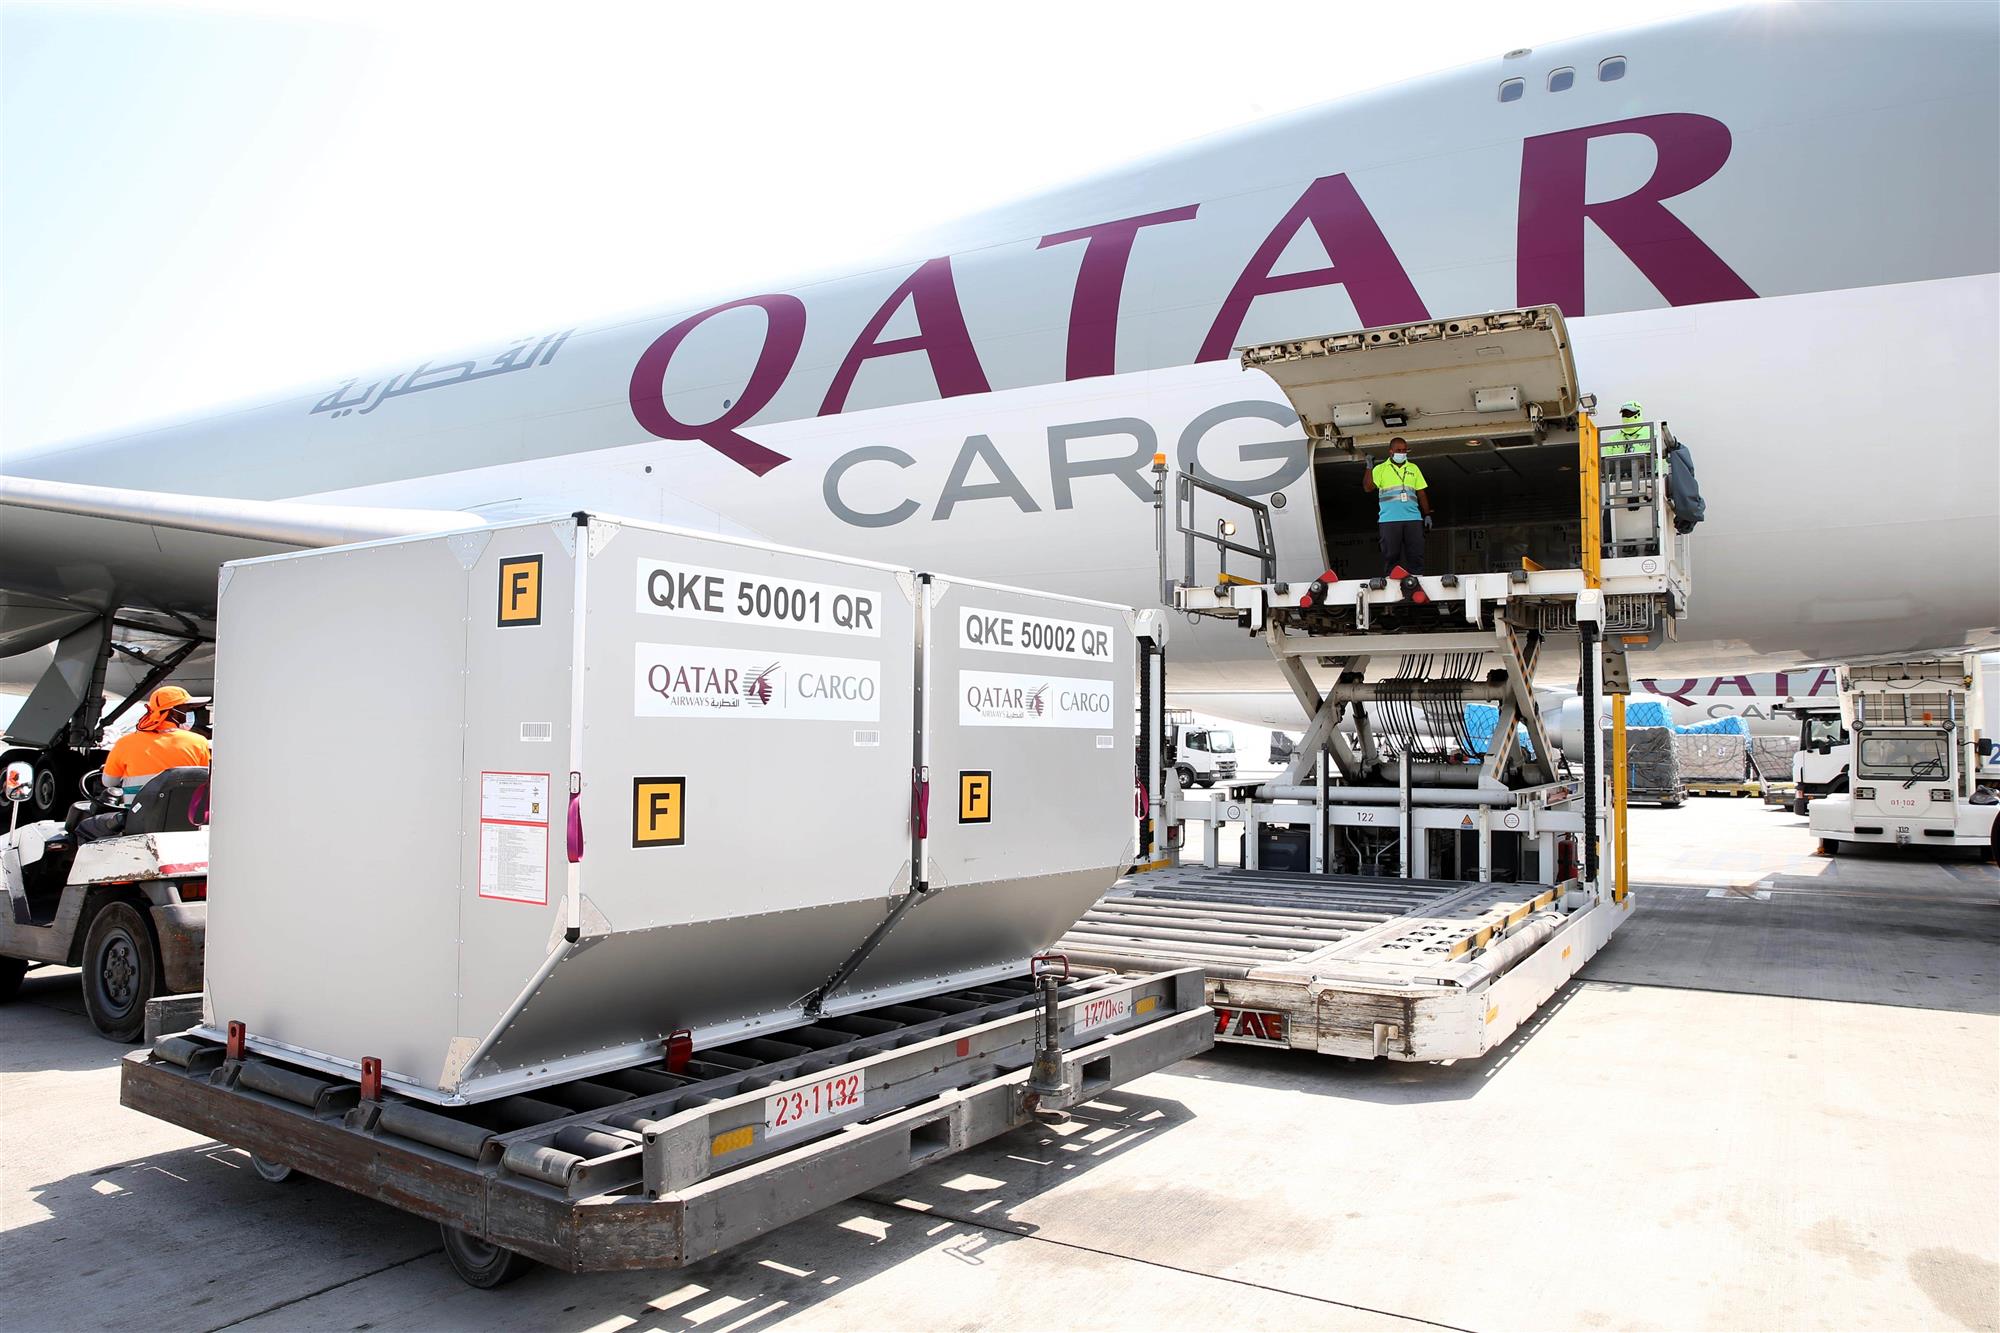 Self Photos / Files - Qatar%20Airways%20Cargo%20to%20replace%20entire%20Unit%20Load%20Device%20ULD%20fleet%20with%20Safrans%20Fire%20Resistant%20Containers